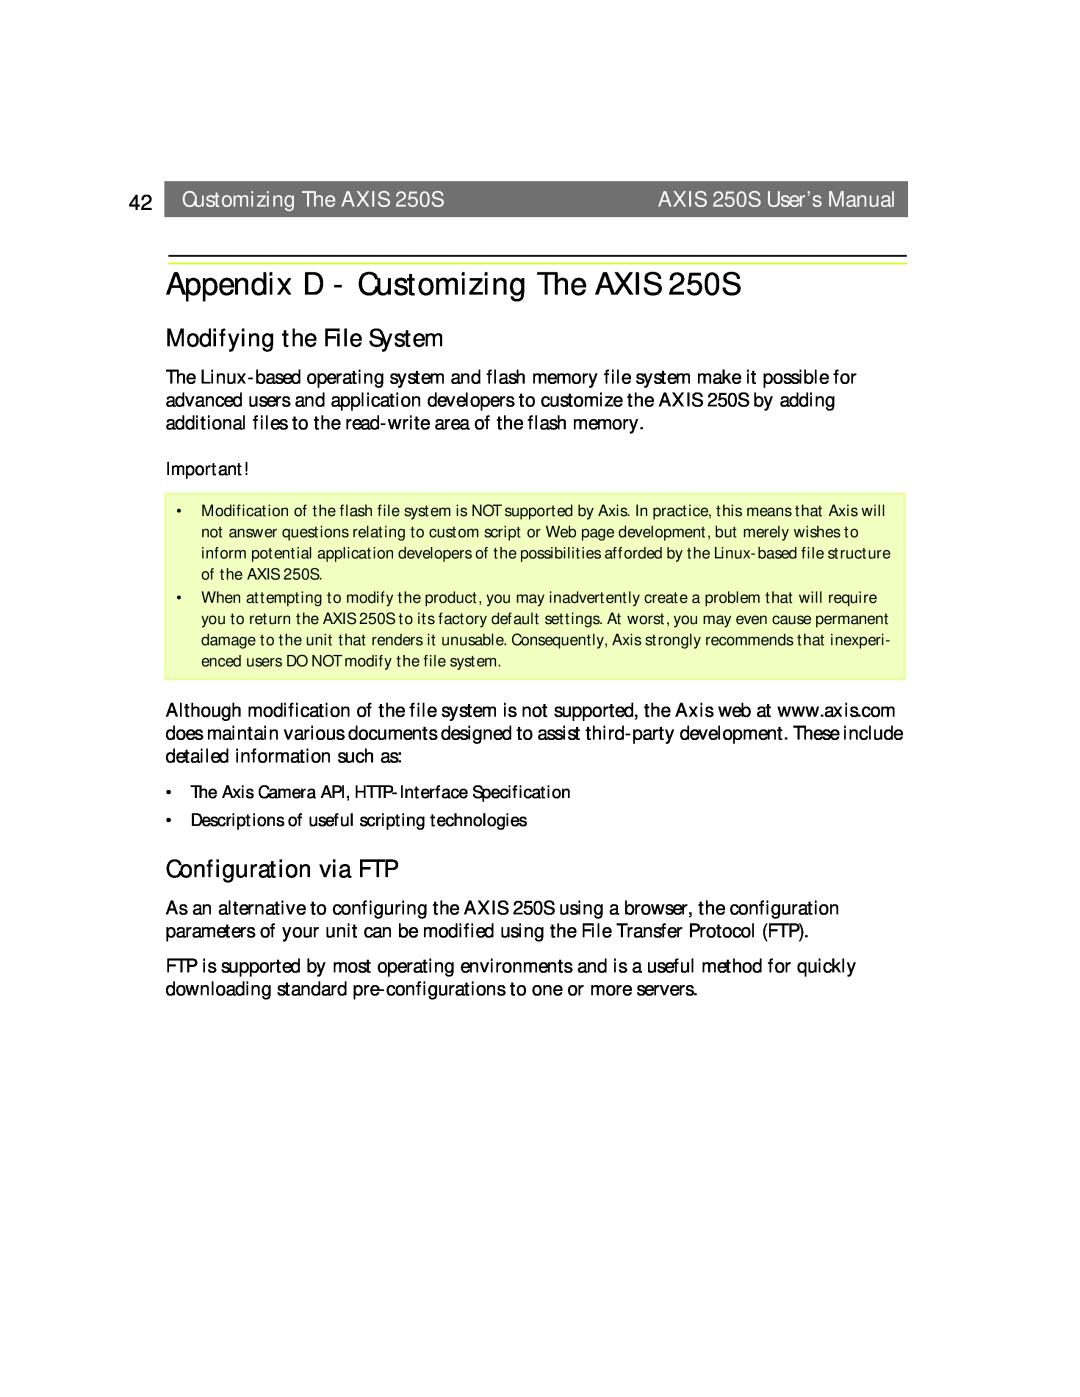 Axis Communications user manual Appendix D - Customizing The AXIS 250S, Modifying the File System, Configuration via FTP 